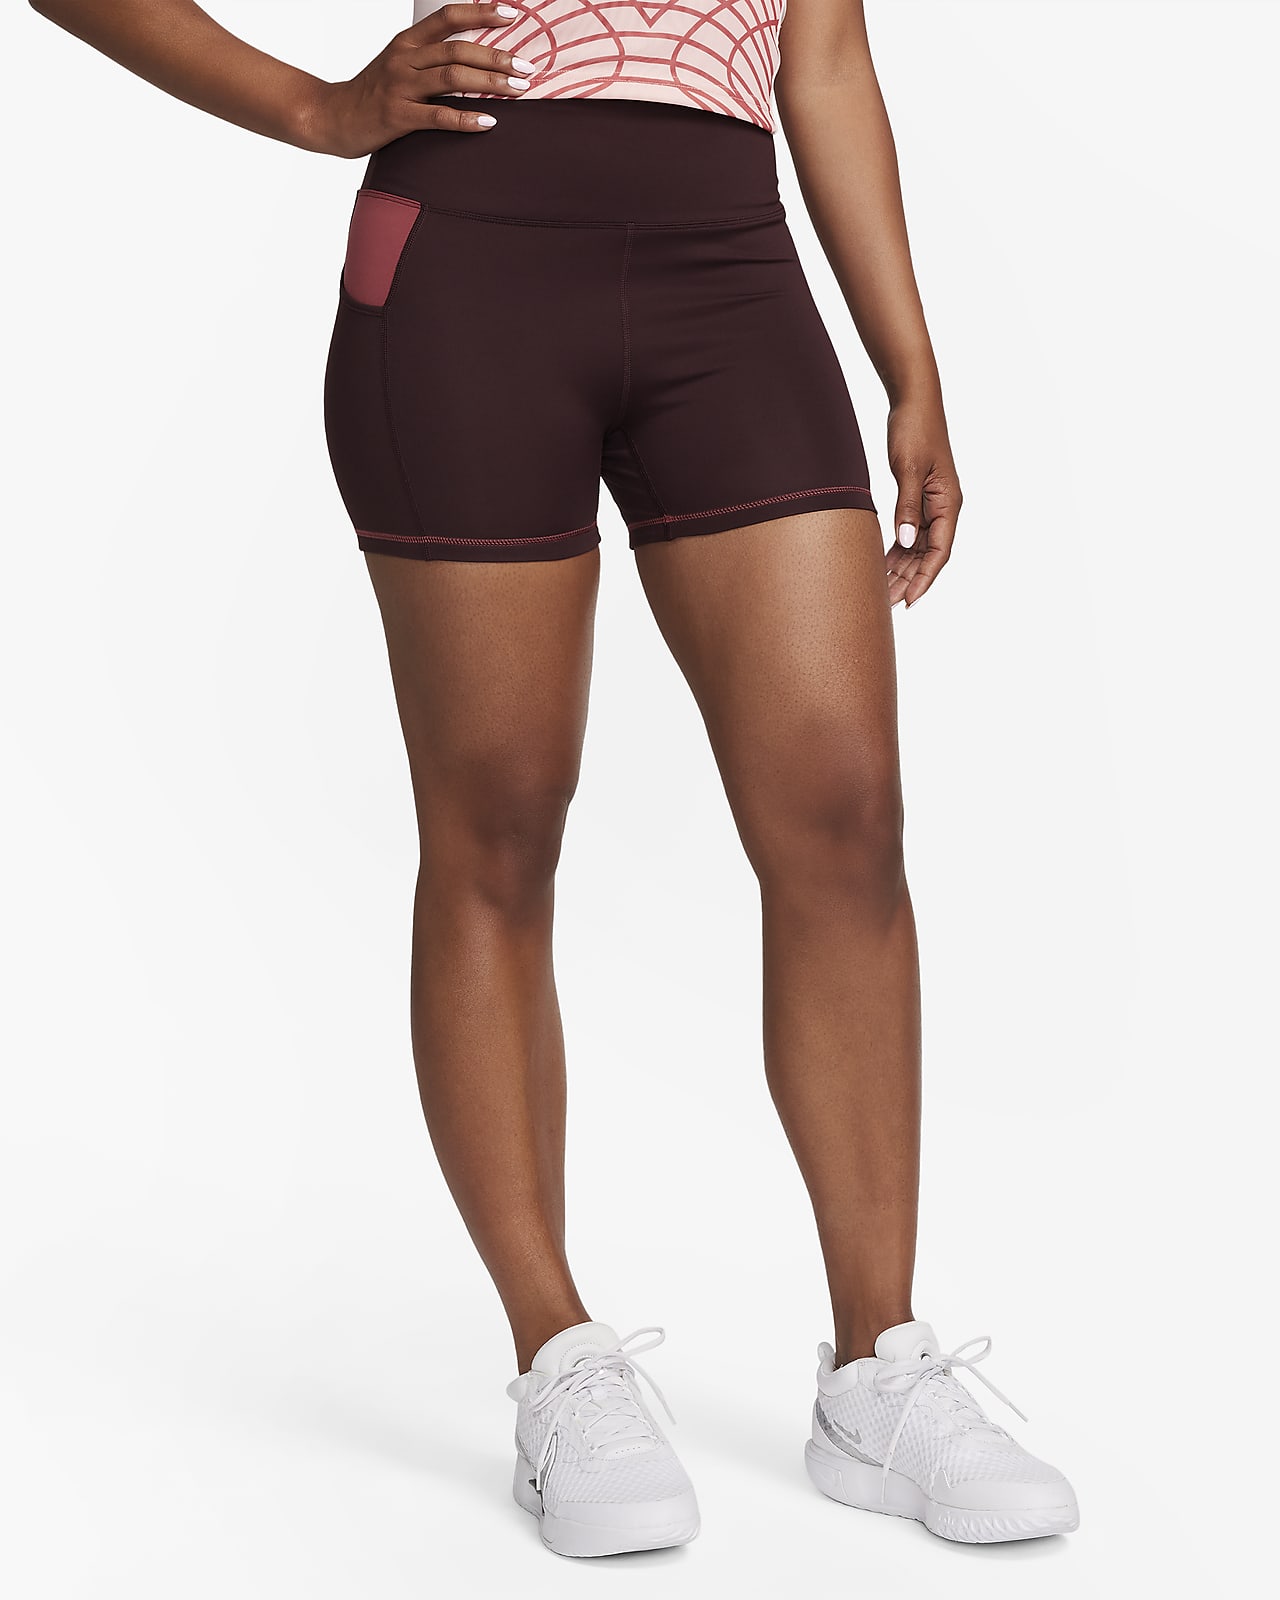 Nike Dri-FIT SE Women's High-Waisted 4" Shorts with Pockets